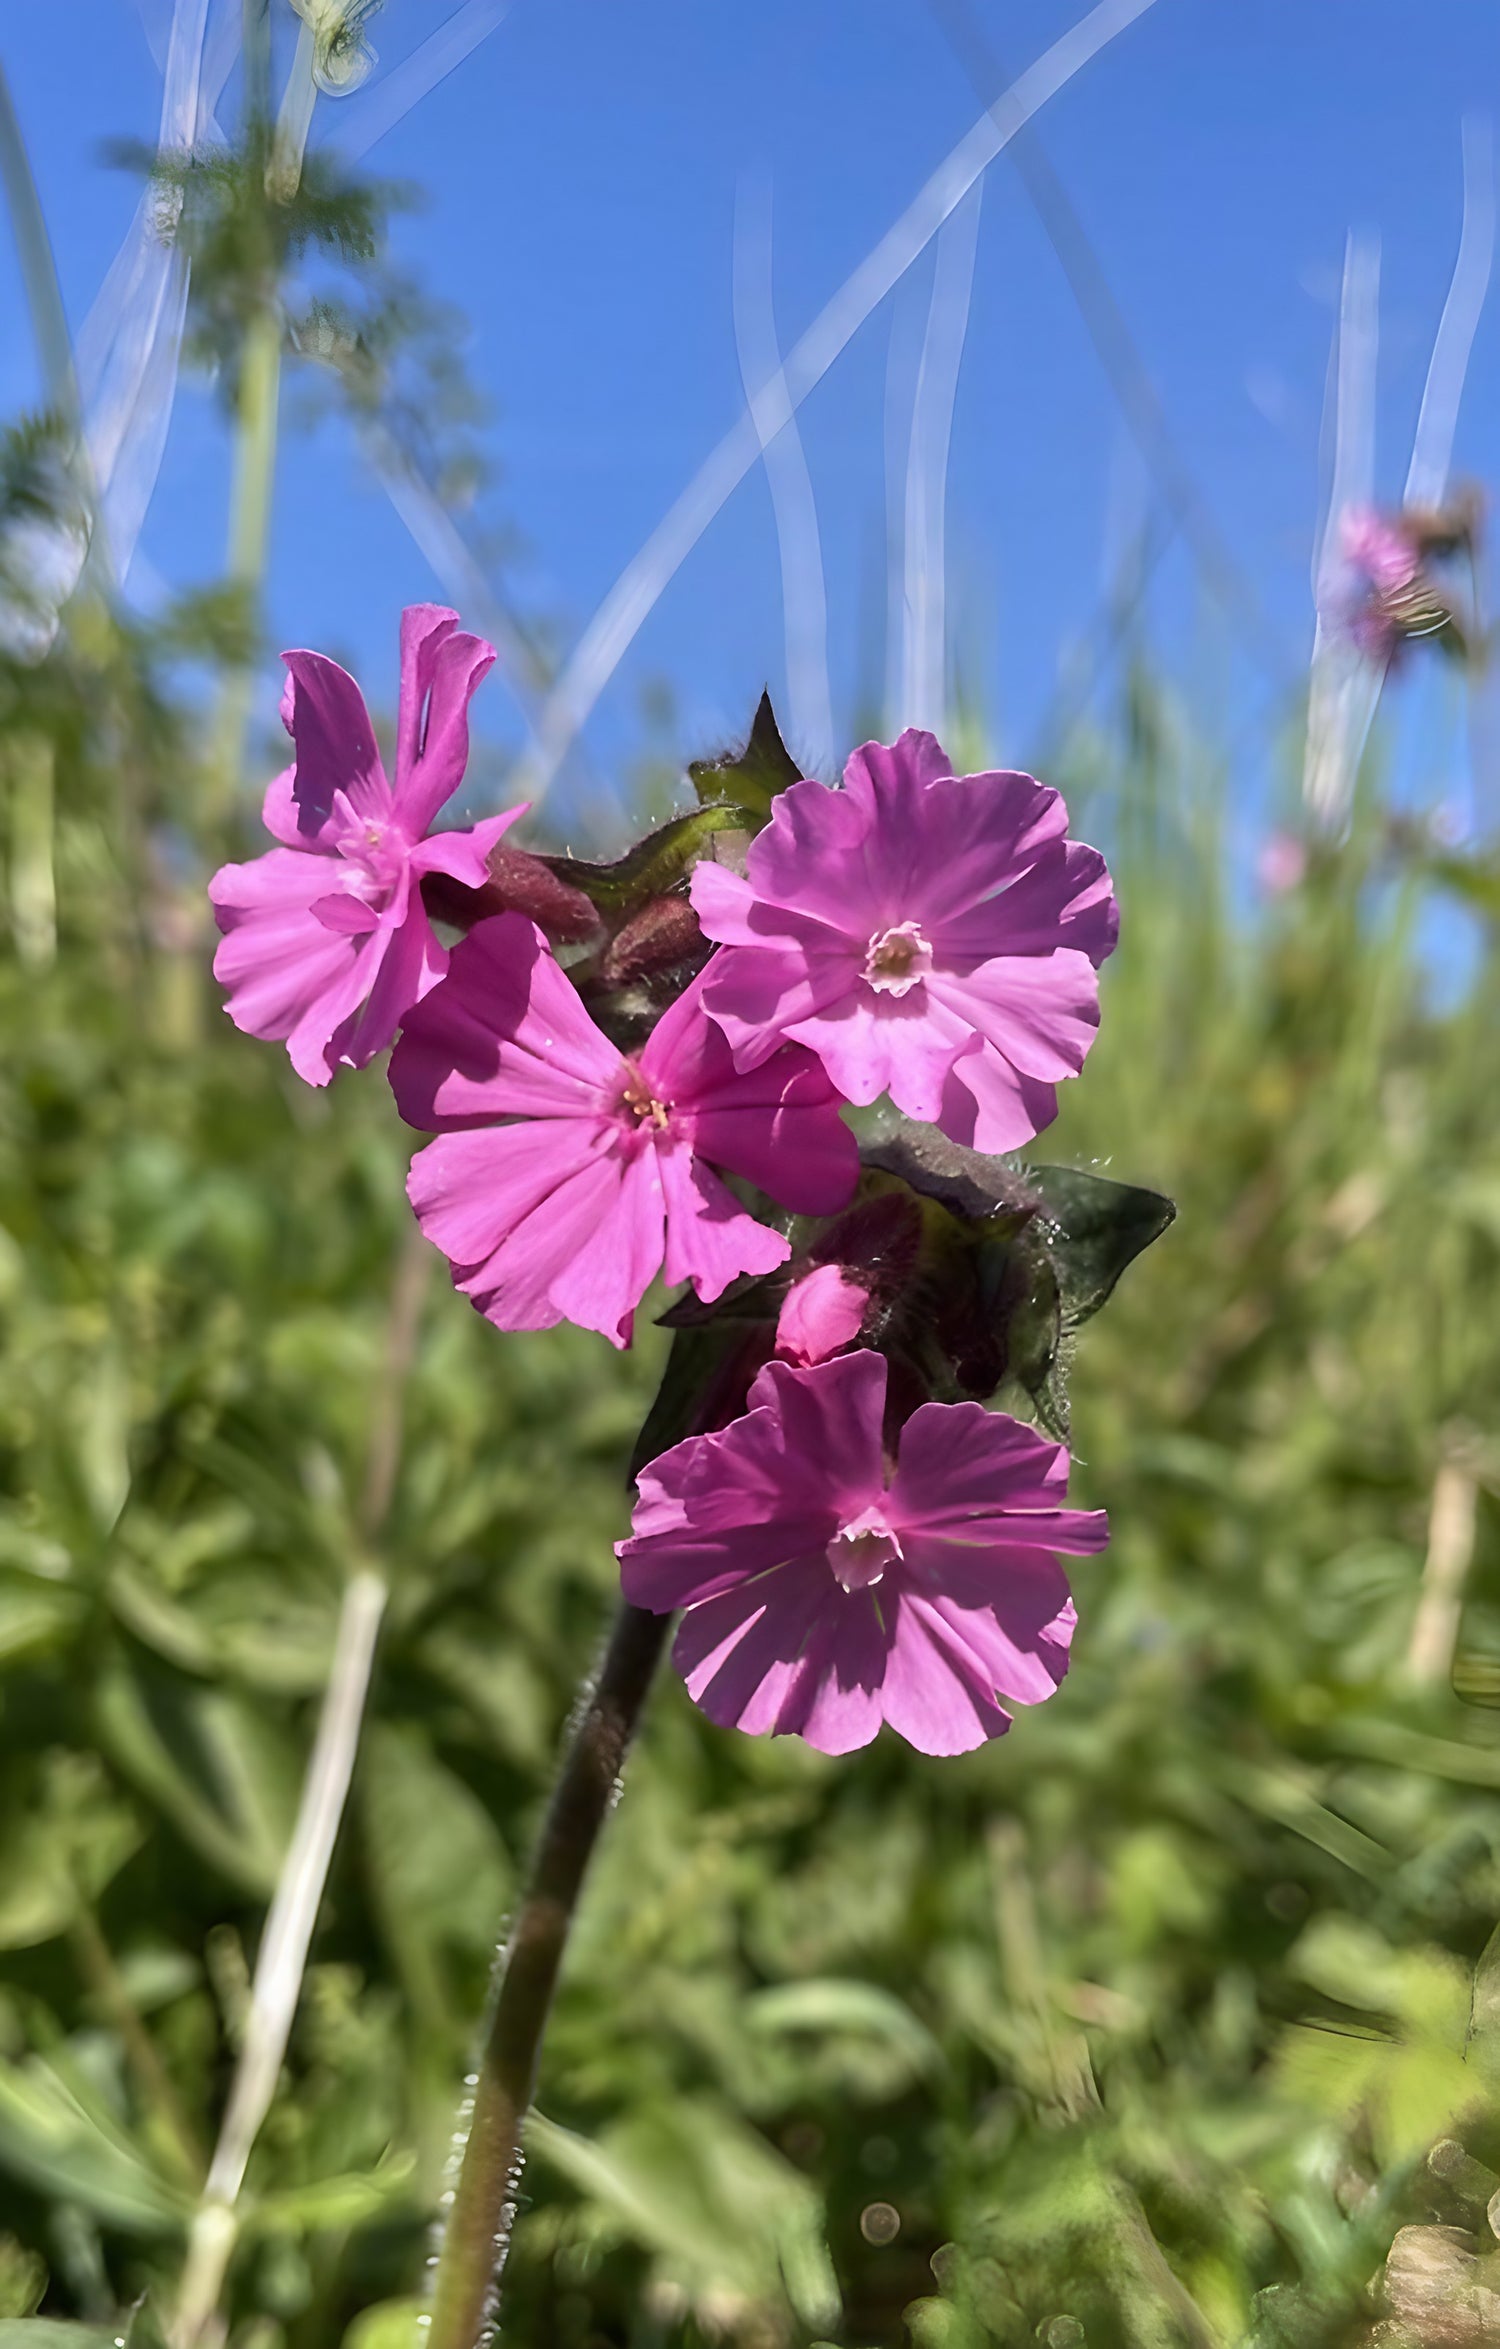 Red Campion flower emerging in a field of grass